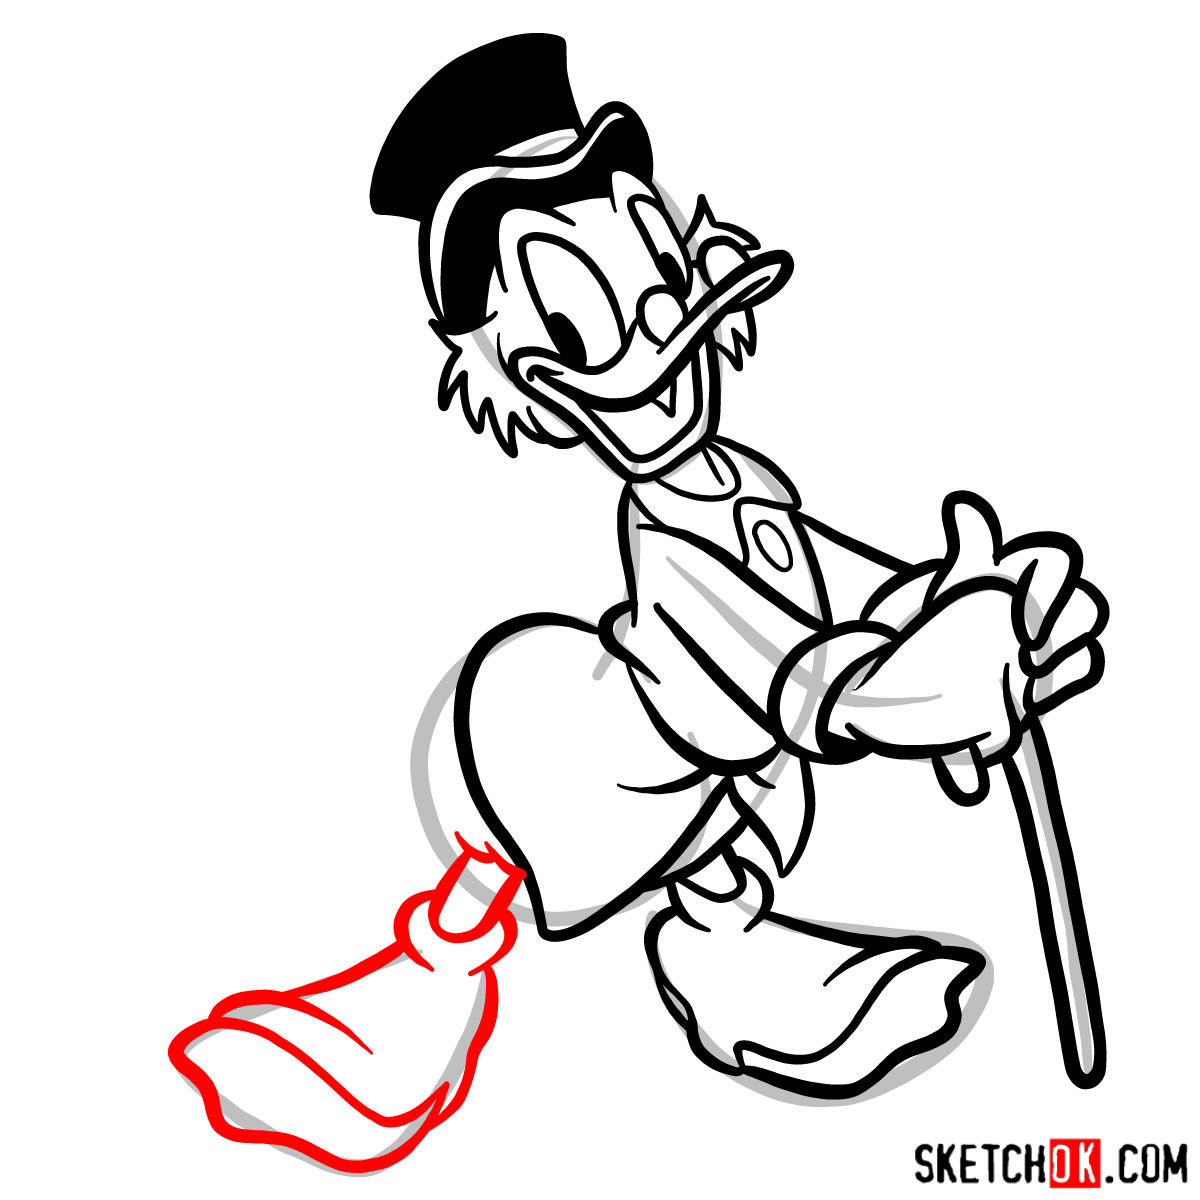 How to draw Scrooge McDuck - step 10